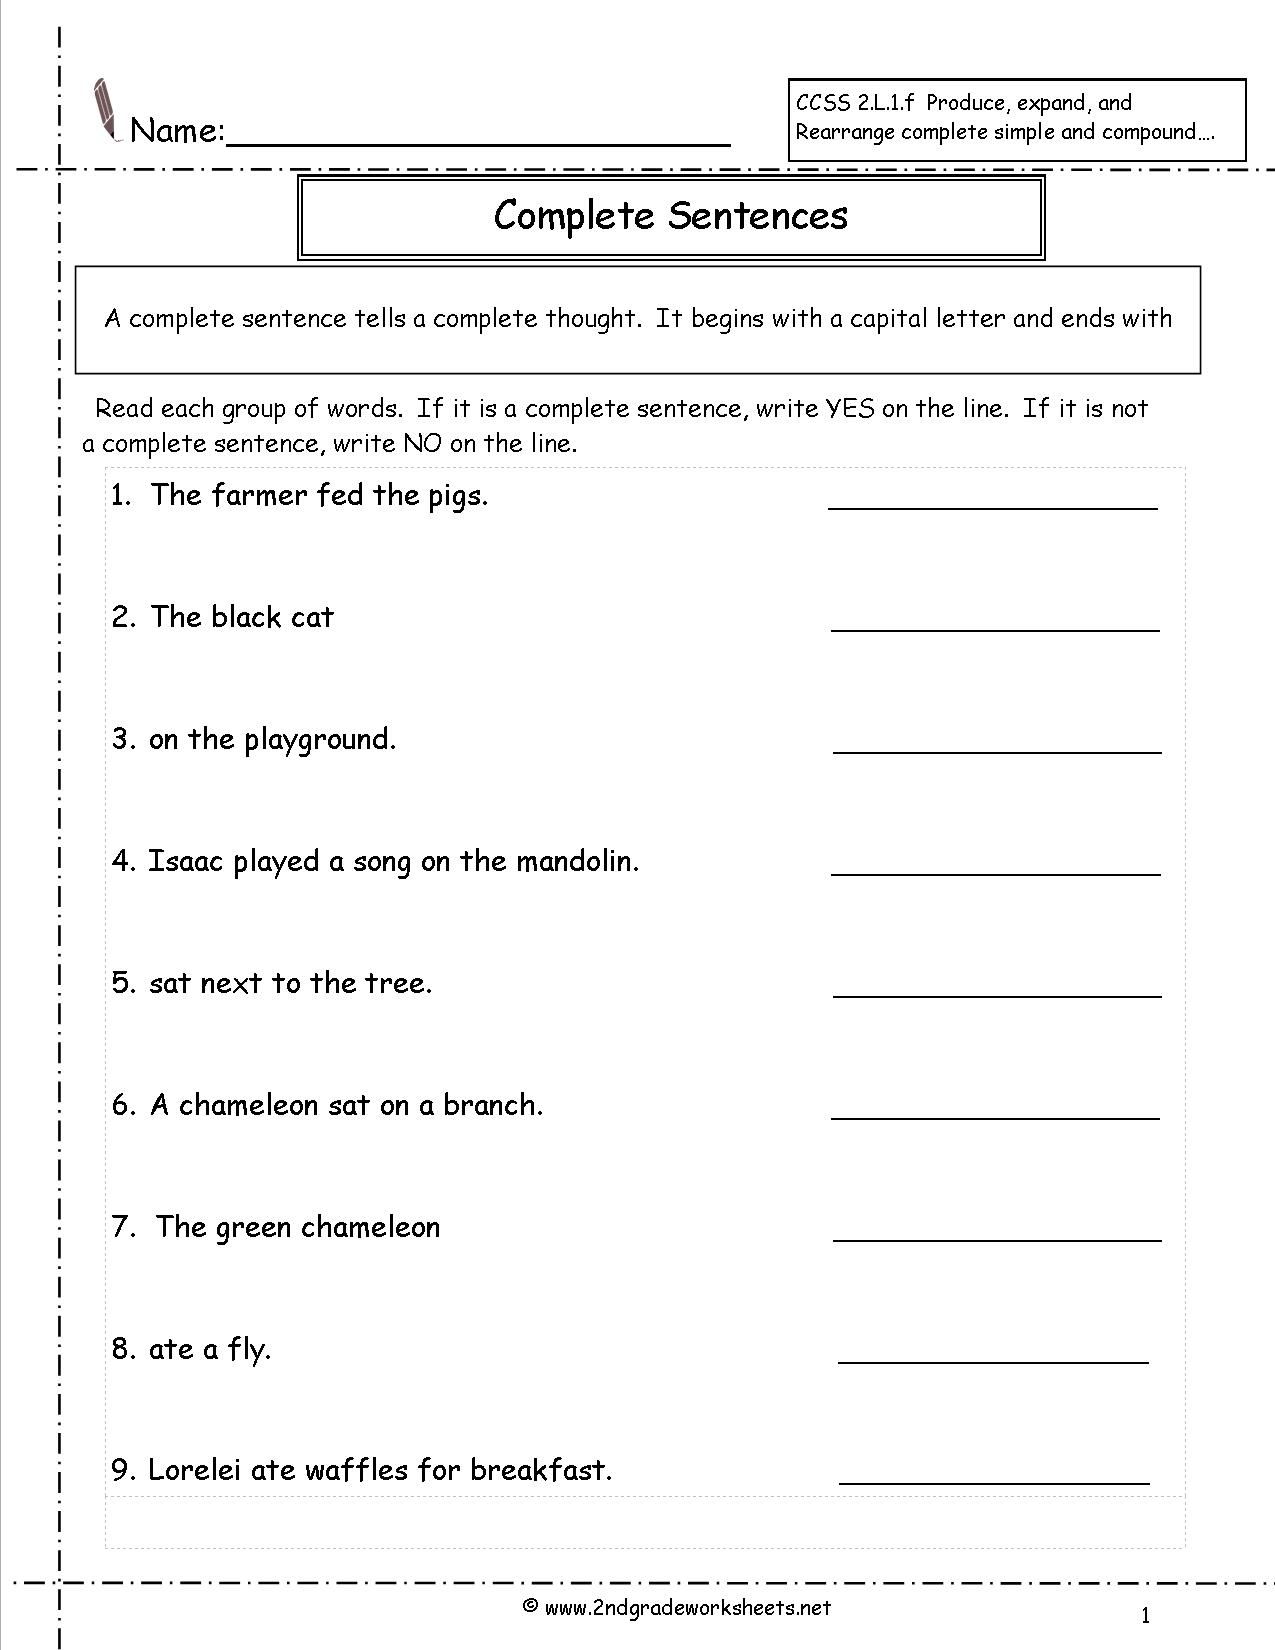 10-best-images-of-worksheets-complete-subject-compound-sentence-worksheets-second-grade